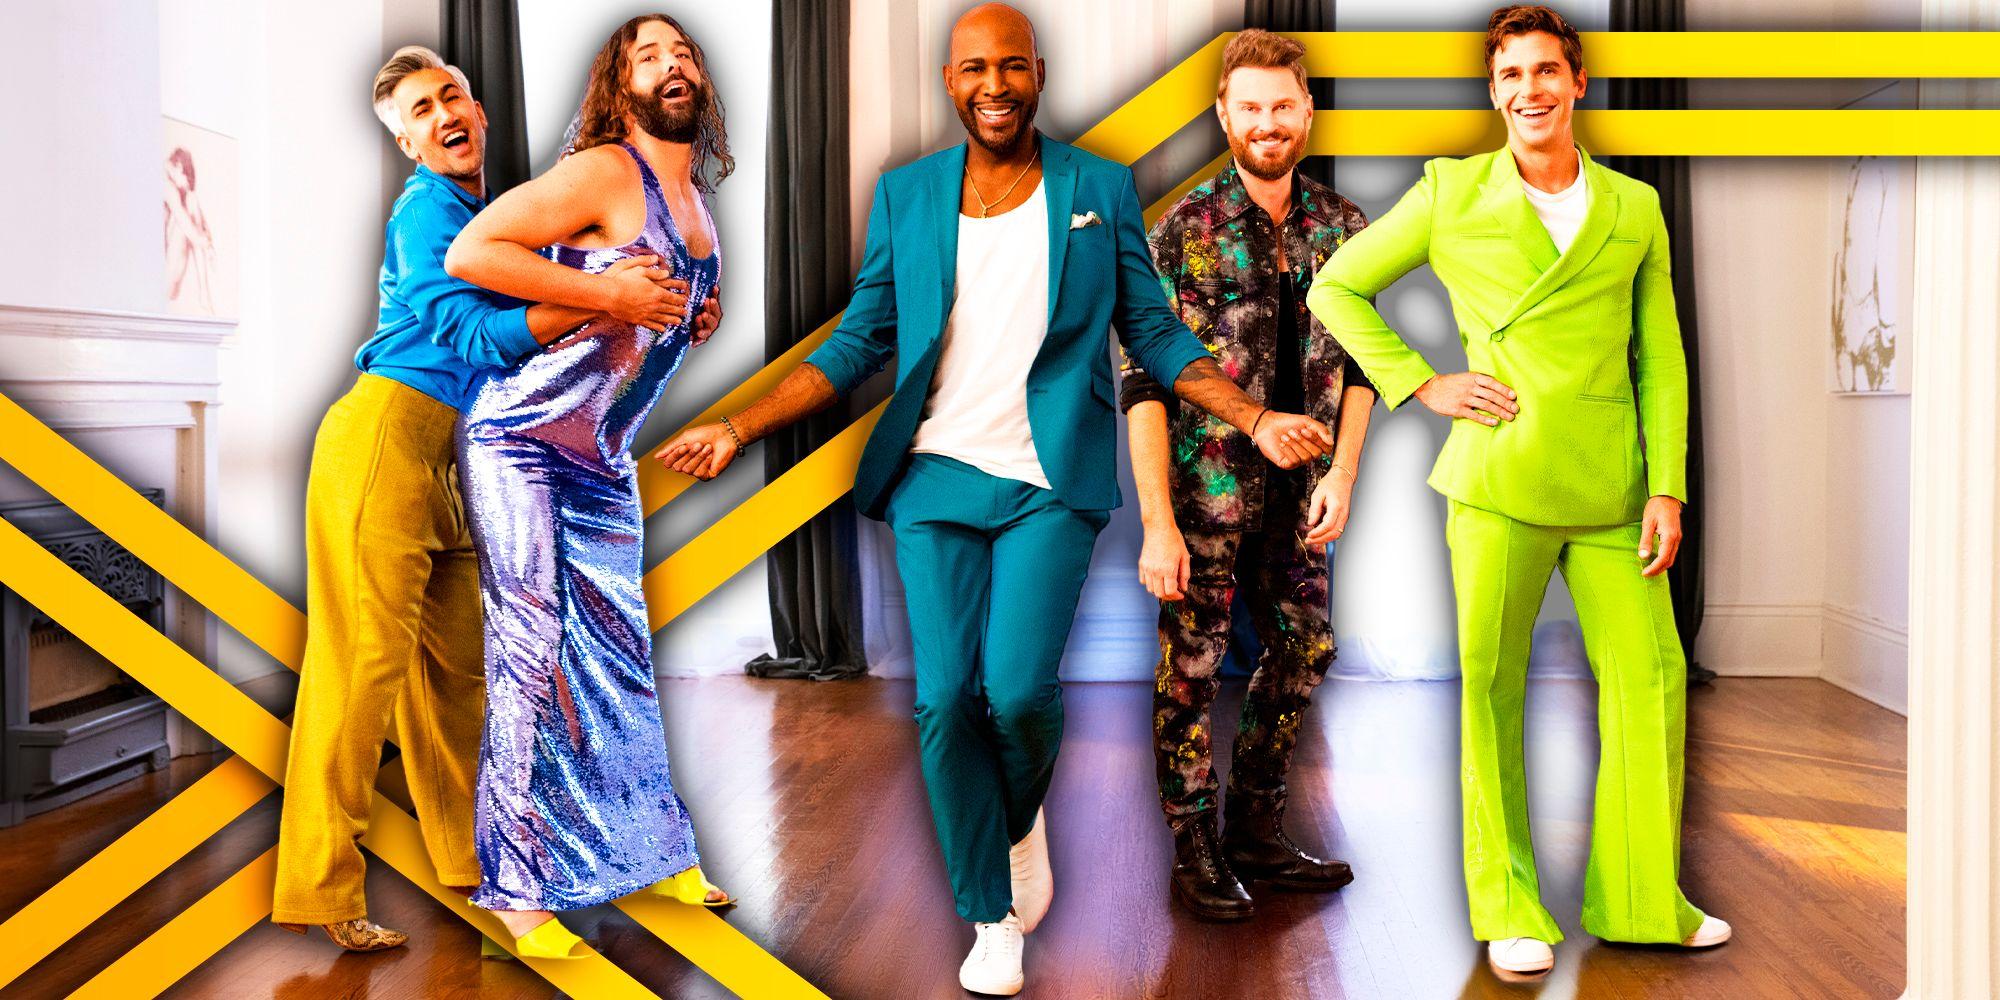 Queer Eye season 8 (January 24) - Streaming on NetflixQueer Eye returns for its eighth outing, continuing the journey of the Fab Five in New Orleans, Louisiana. The team—Jonathan Van Ness, Bobby Berk, Karamo Brown, Antoni Porowski, and Tan France—brings their unique blend of expertise to help transform lives. Known for its positive impact, the series promotes self-acceptance and growth. Queer Eye has also been renewed for a ninth season, set to take place in Las Vegas, Nevada.